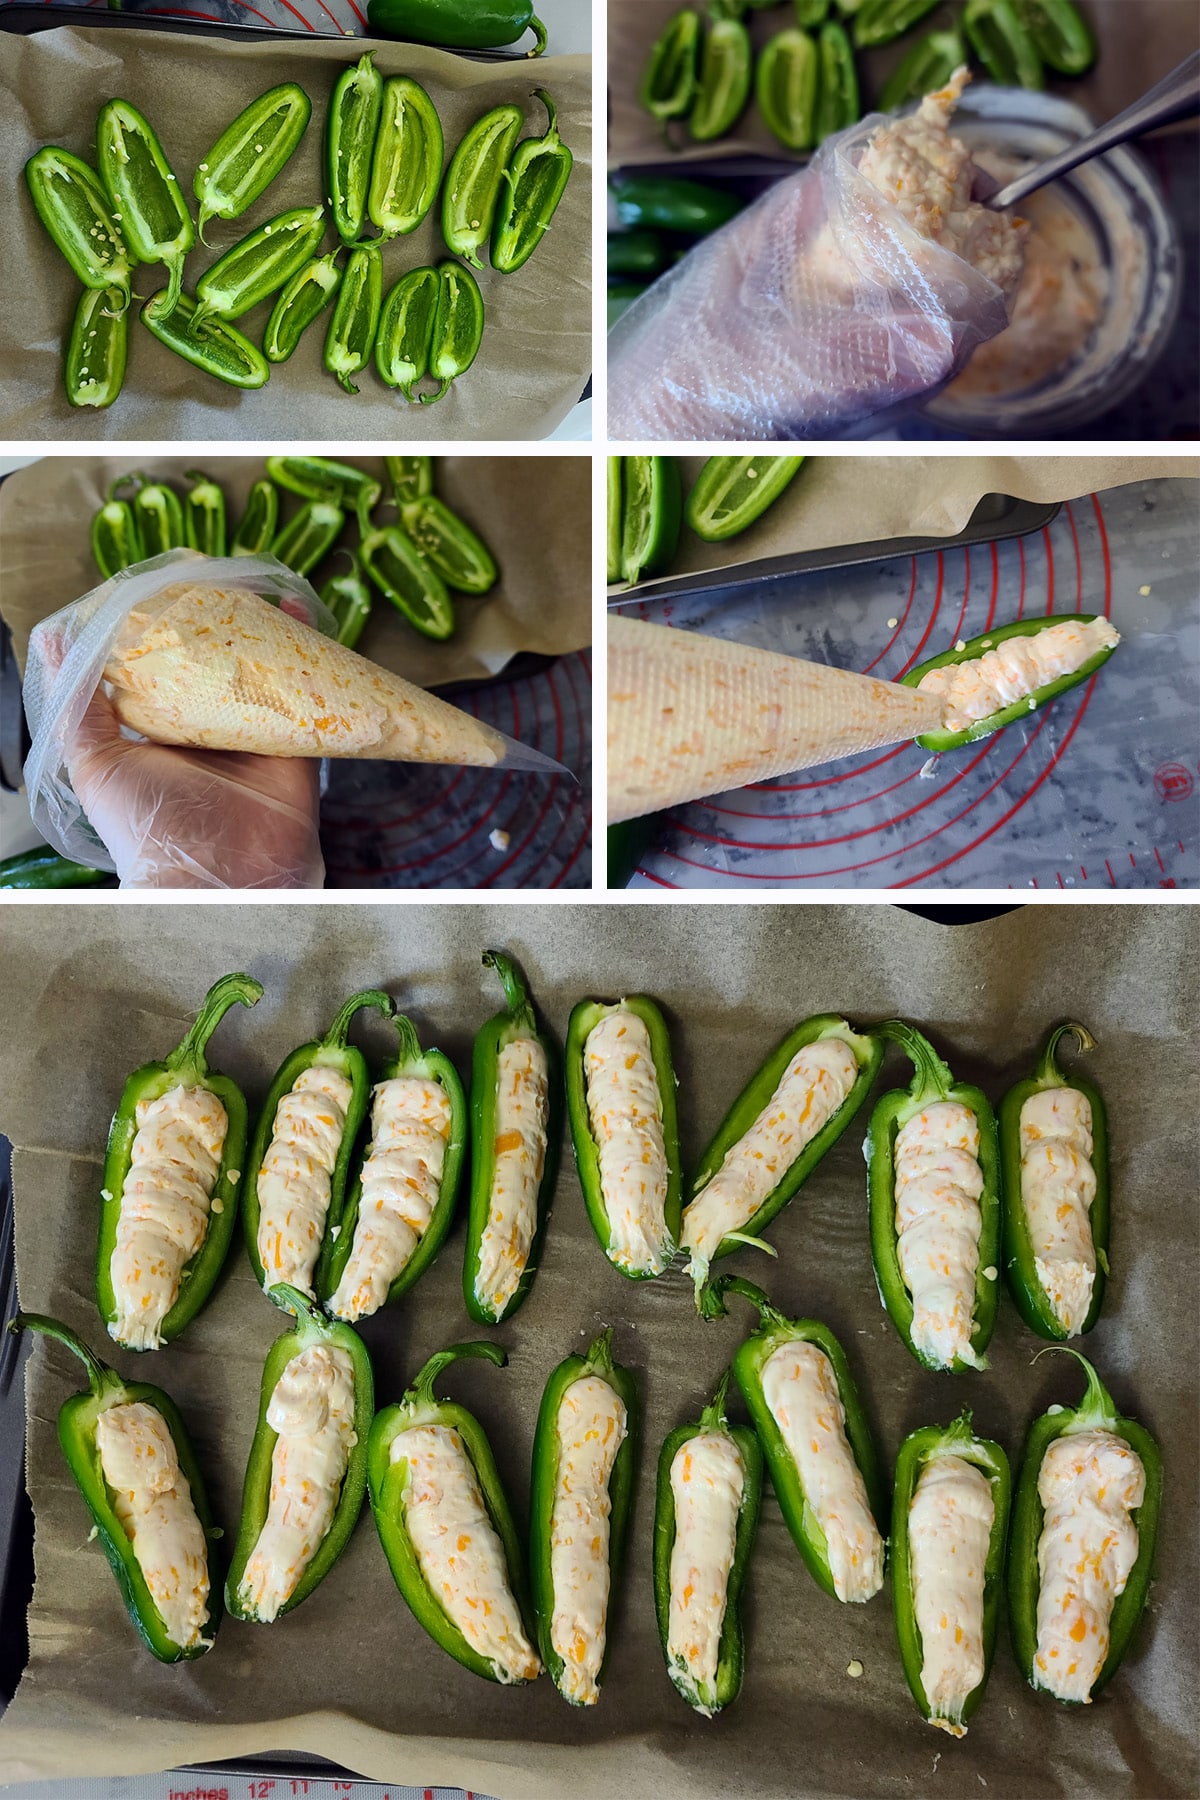 A 5 part image showing the popper filling being piped into halved jalapenos.